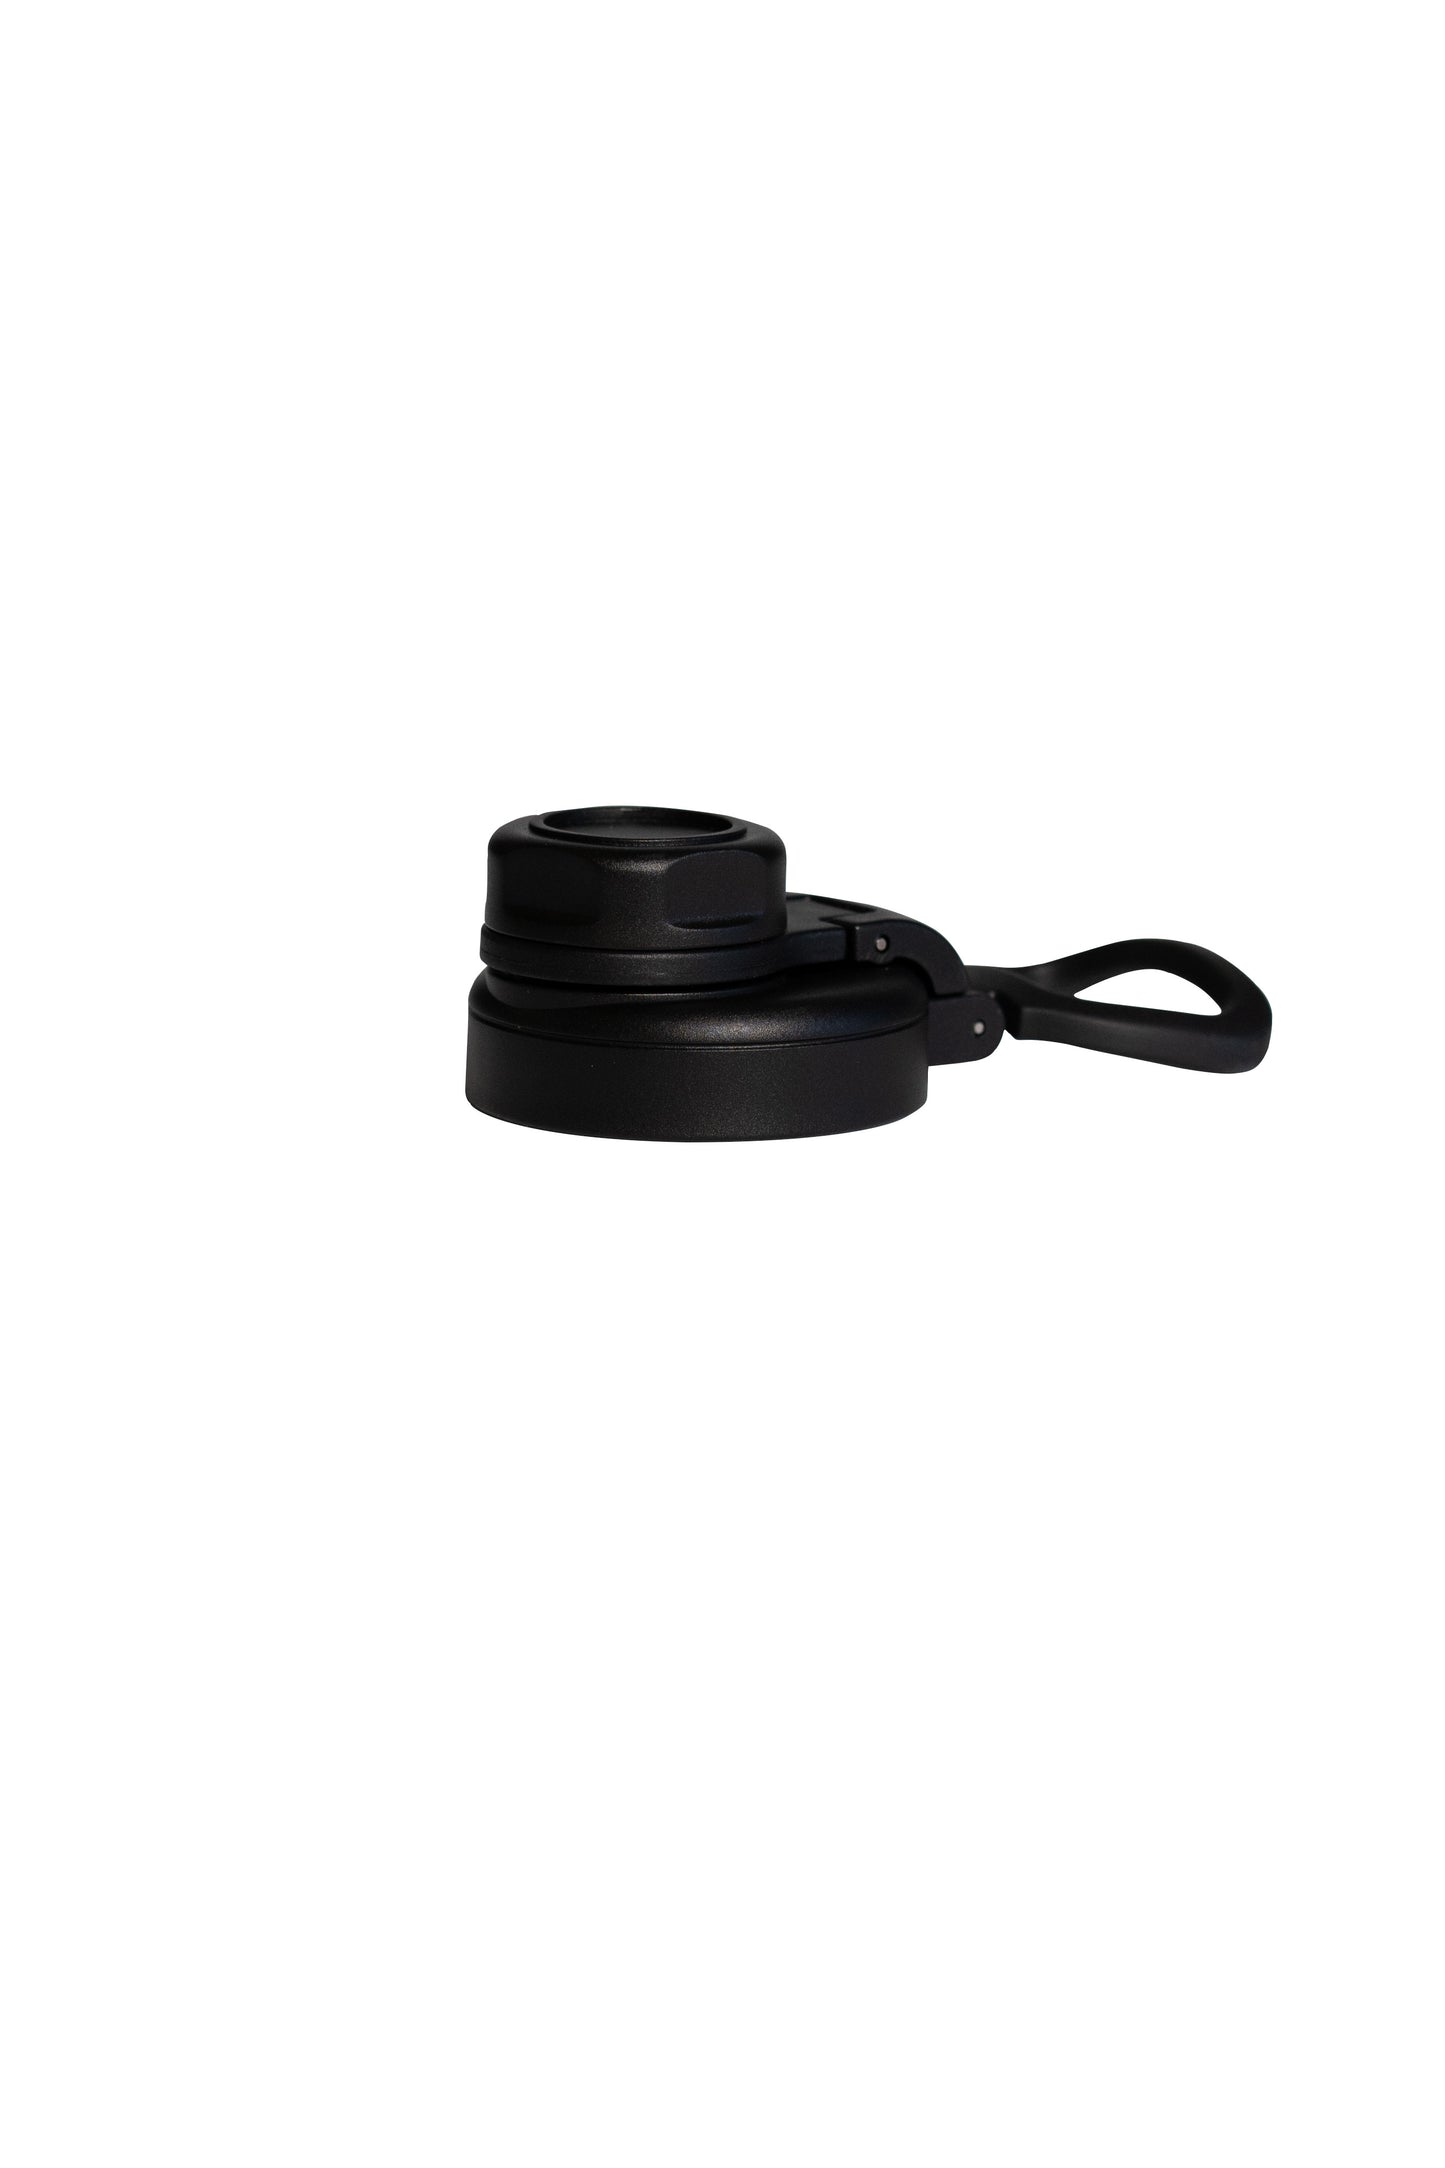 Chugger with Dual Articulating Lid and Soft Handle